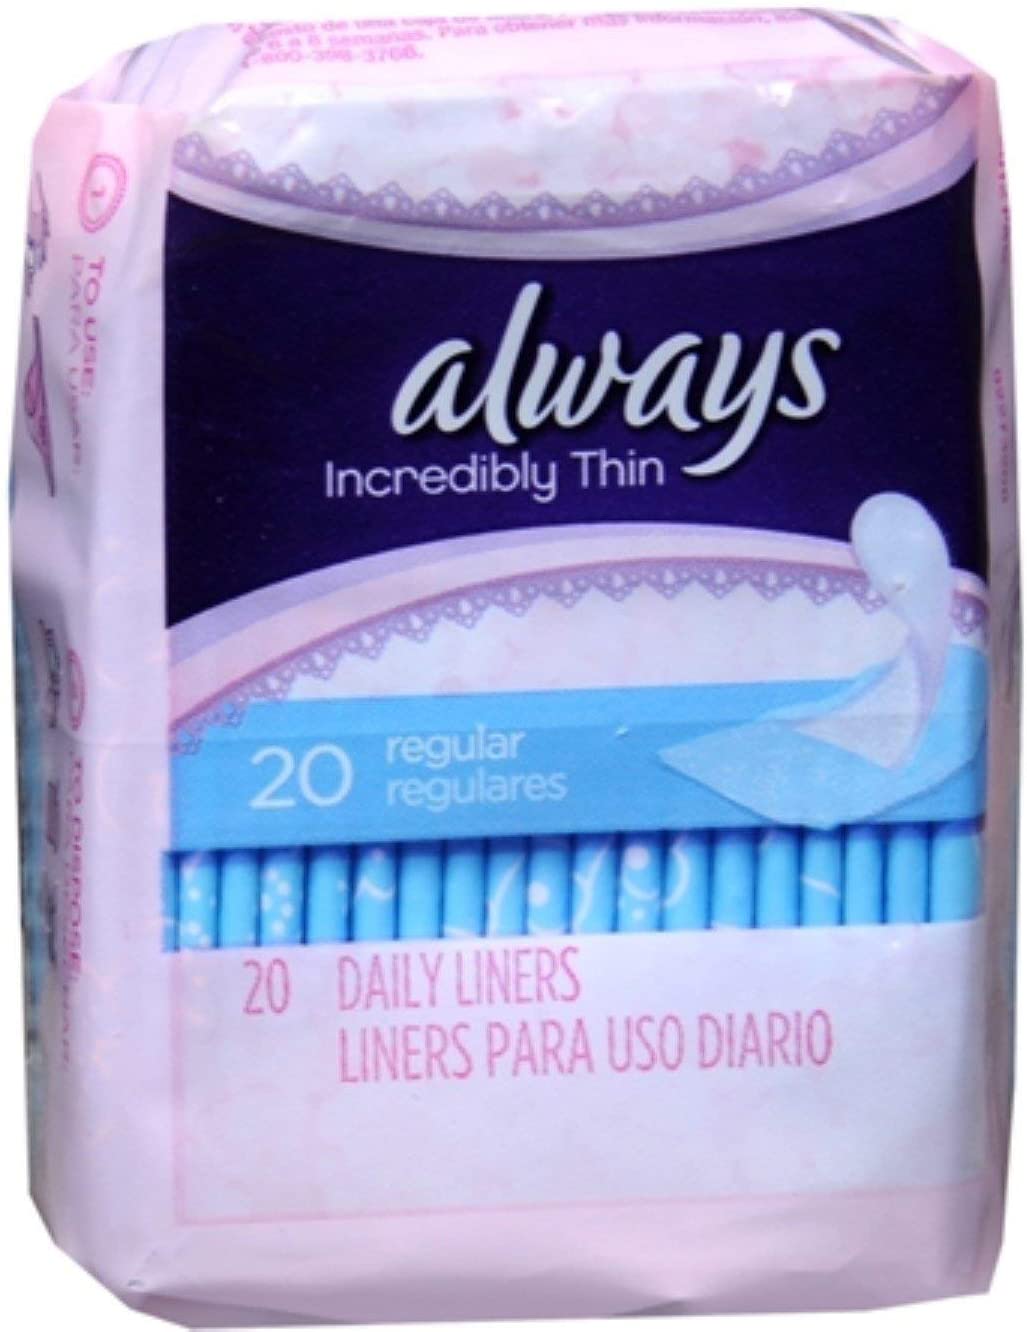 Always Thin Pantiliners Regular Unscented 20 ct